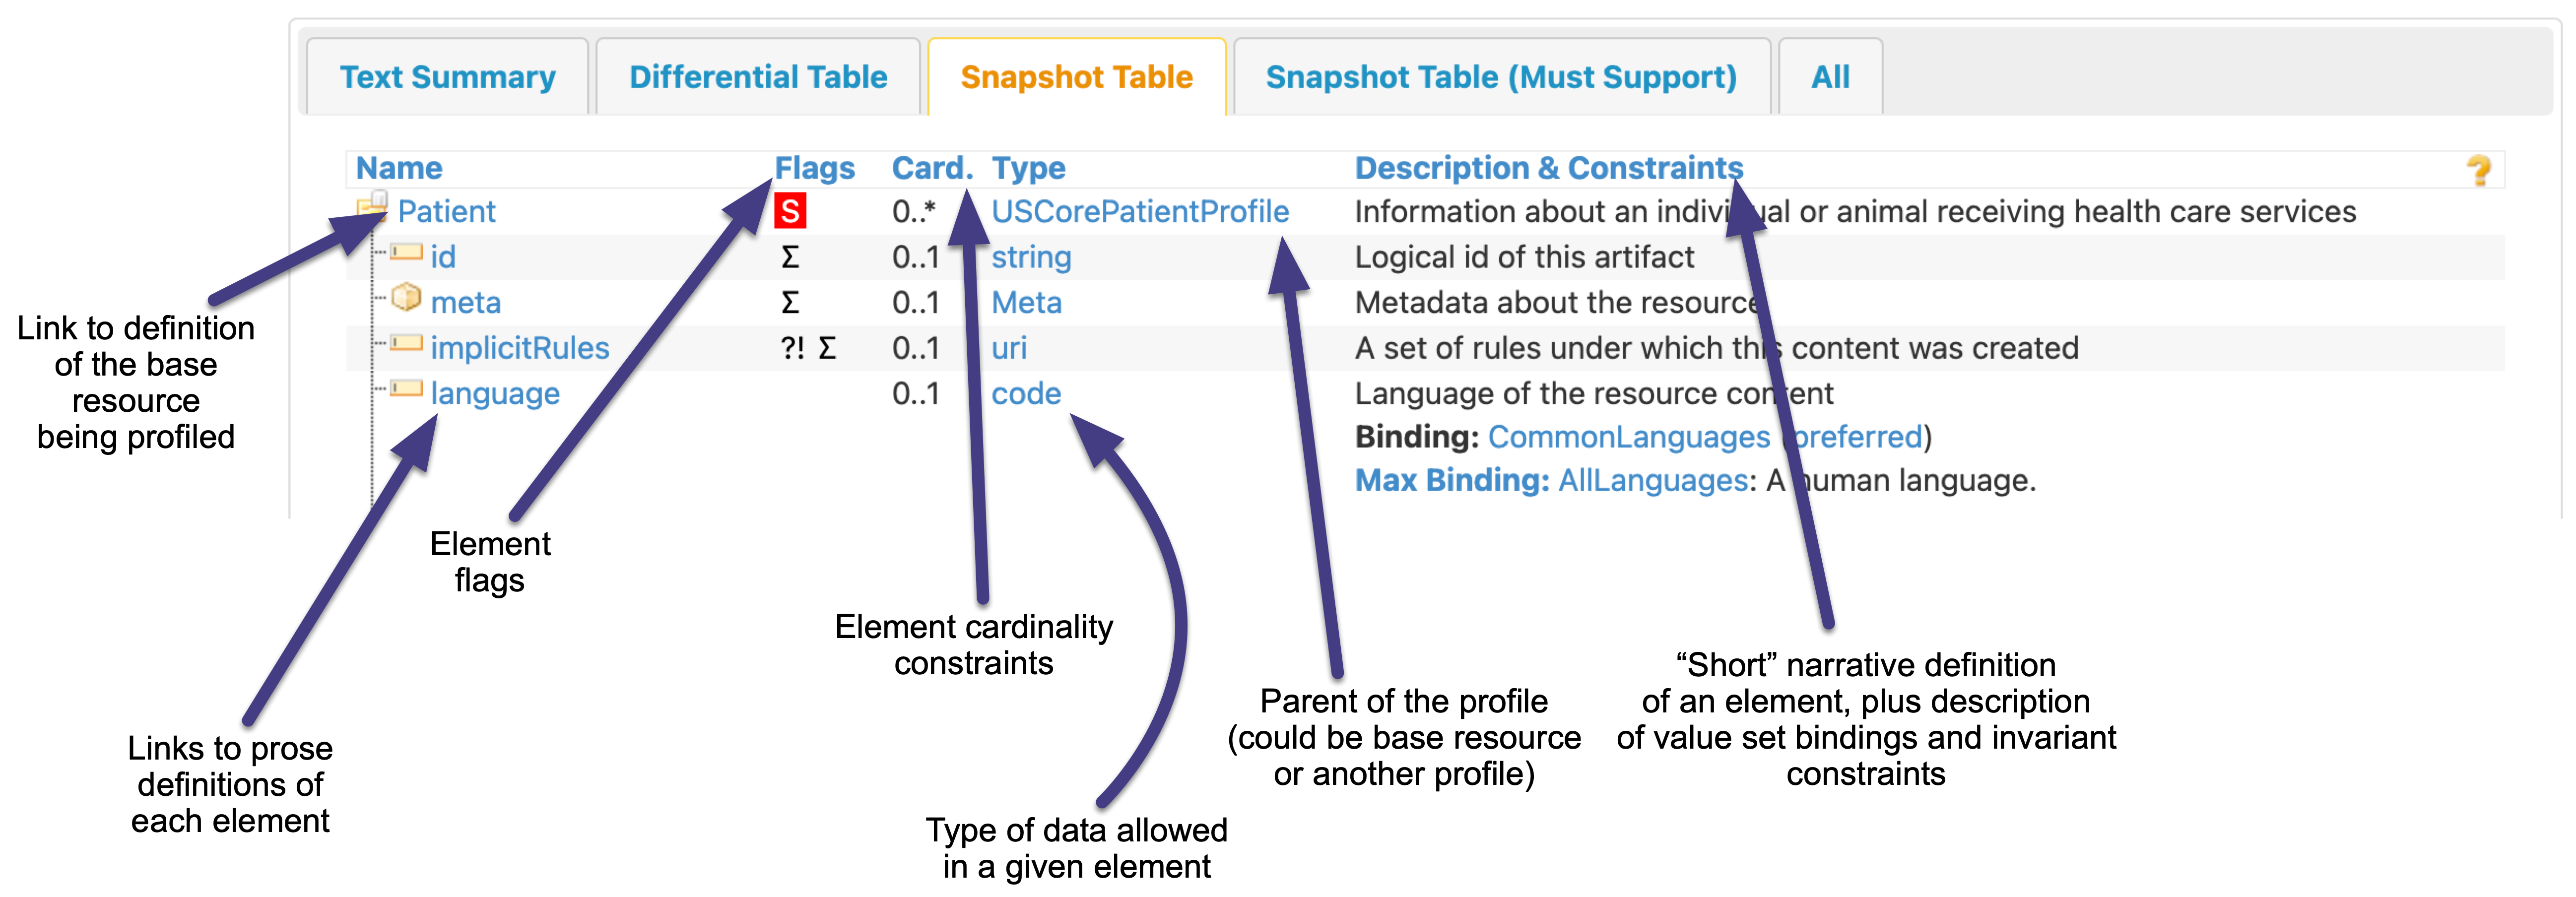 Annotated screenshot of the snapshot table from the example profile